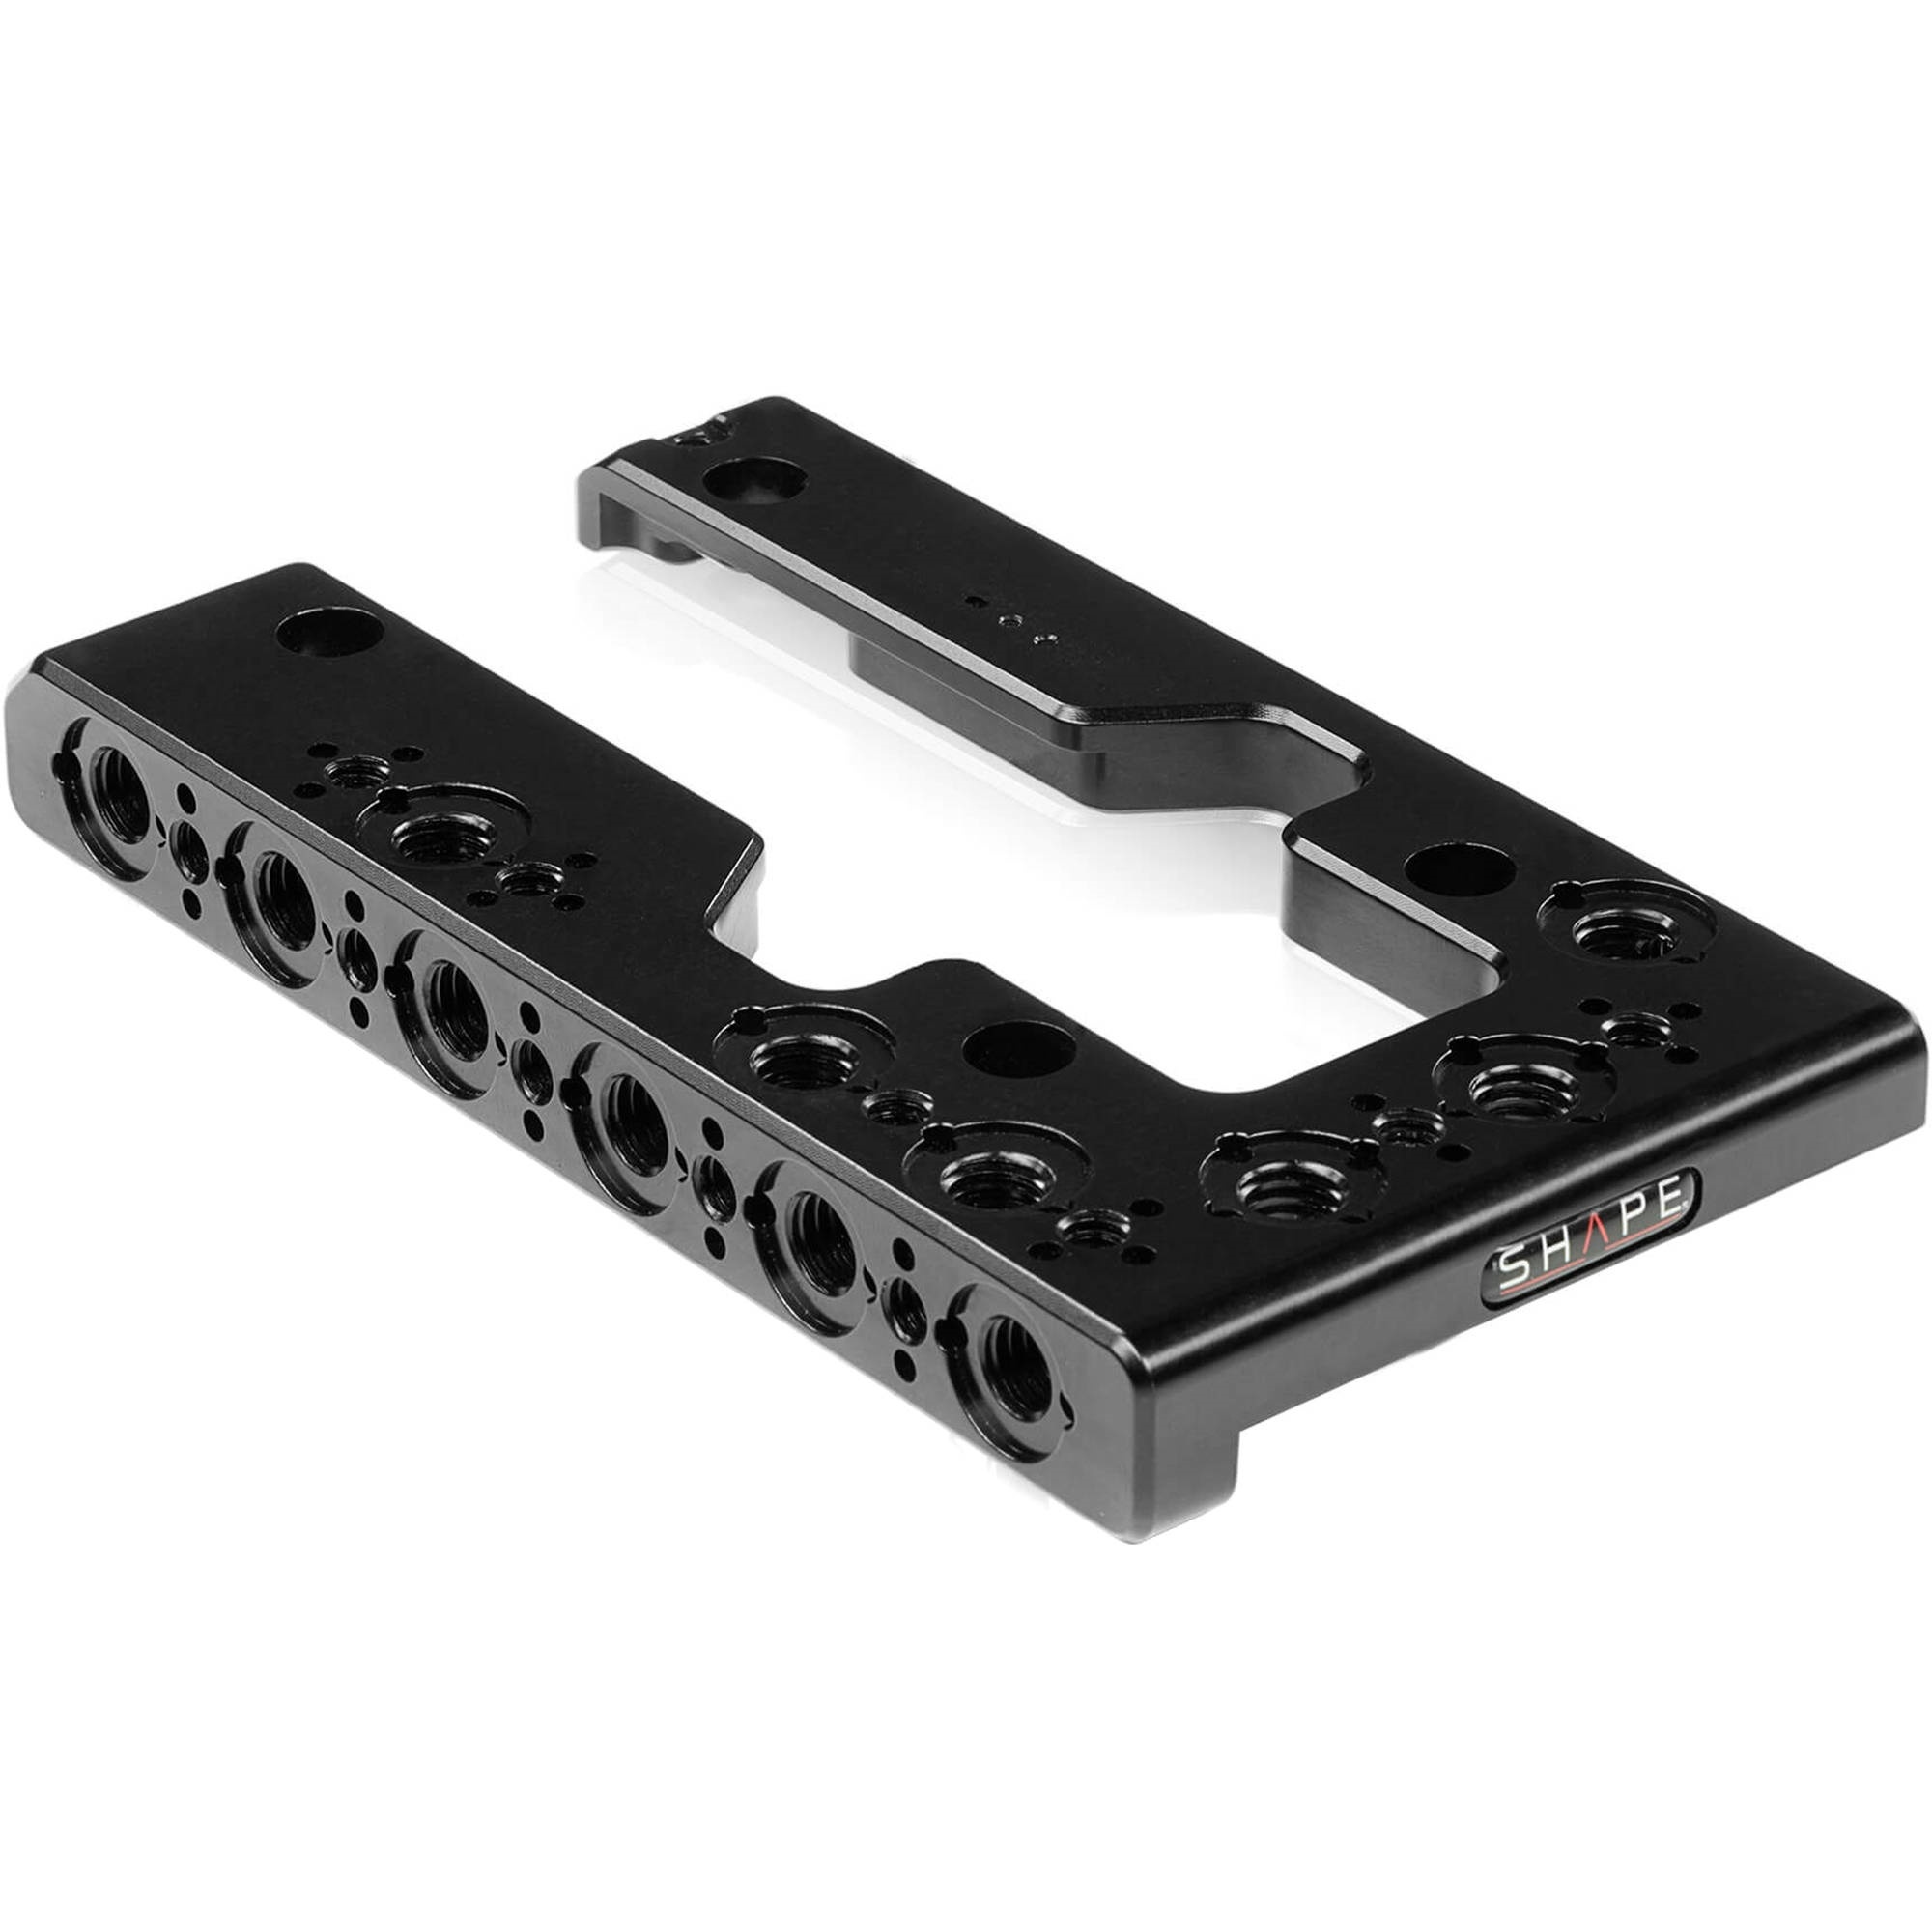 SHAPE Top Plate for Sony FX9 Camera